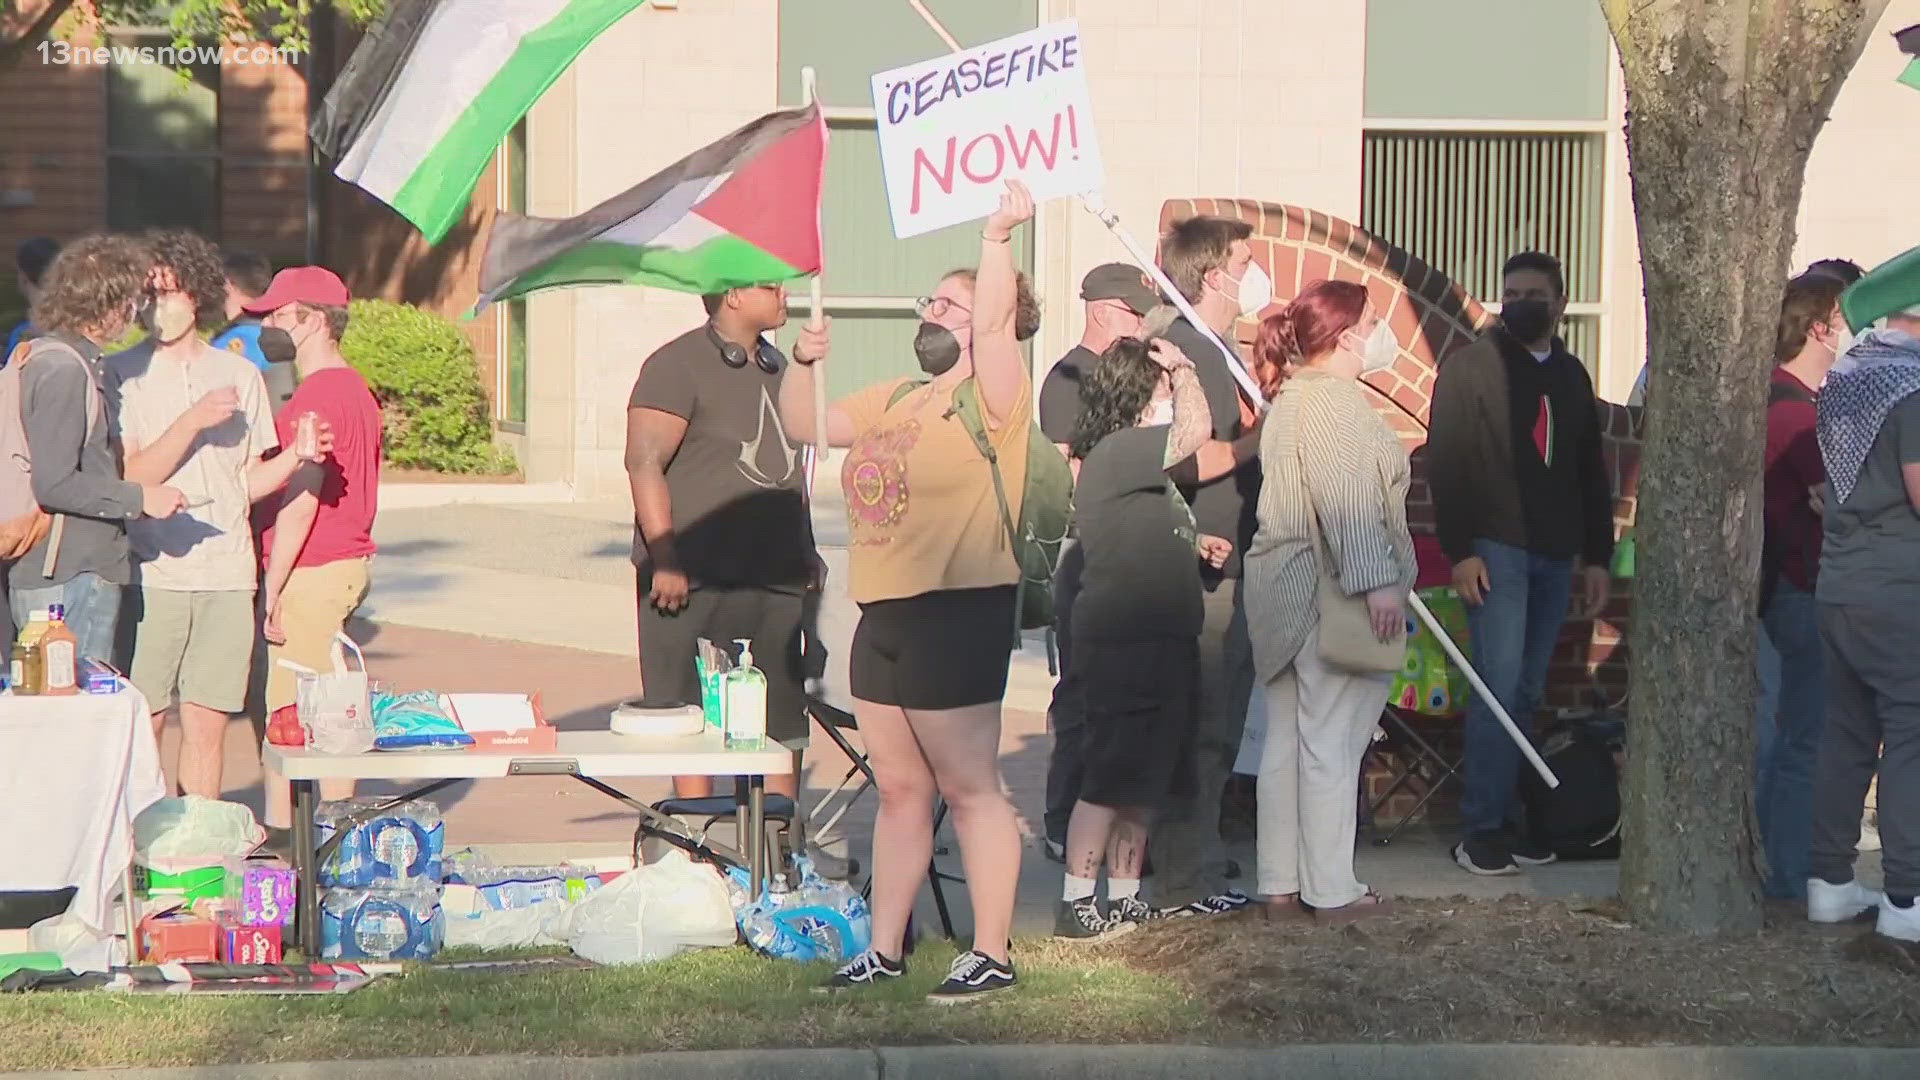 Four colleges in Virginia have made demonstrations protesting against the war in Gaza. Dozens of protestors gathered at ODU in Norfolk on Wednesday.